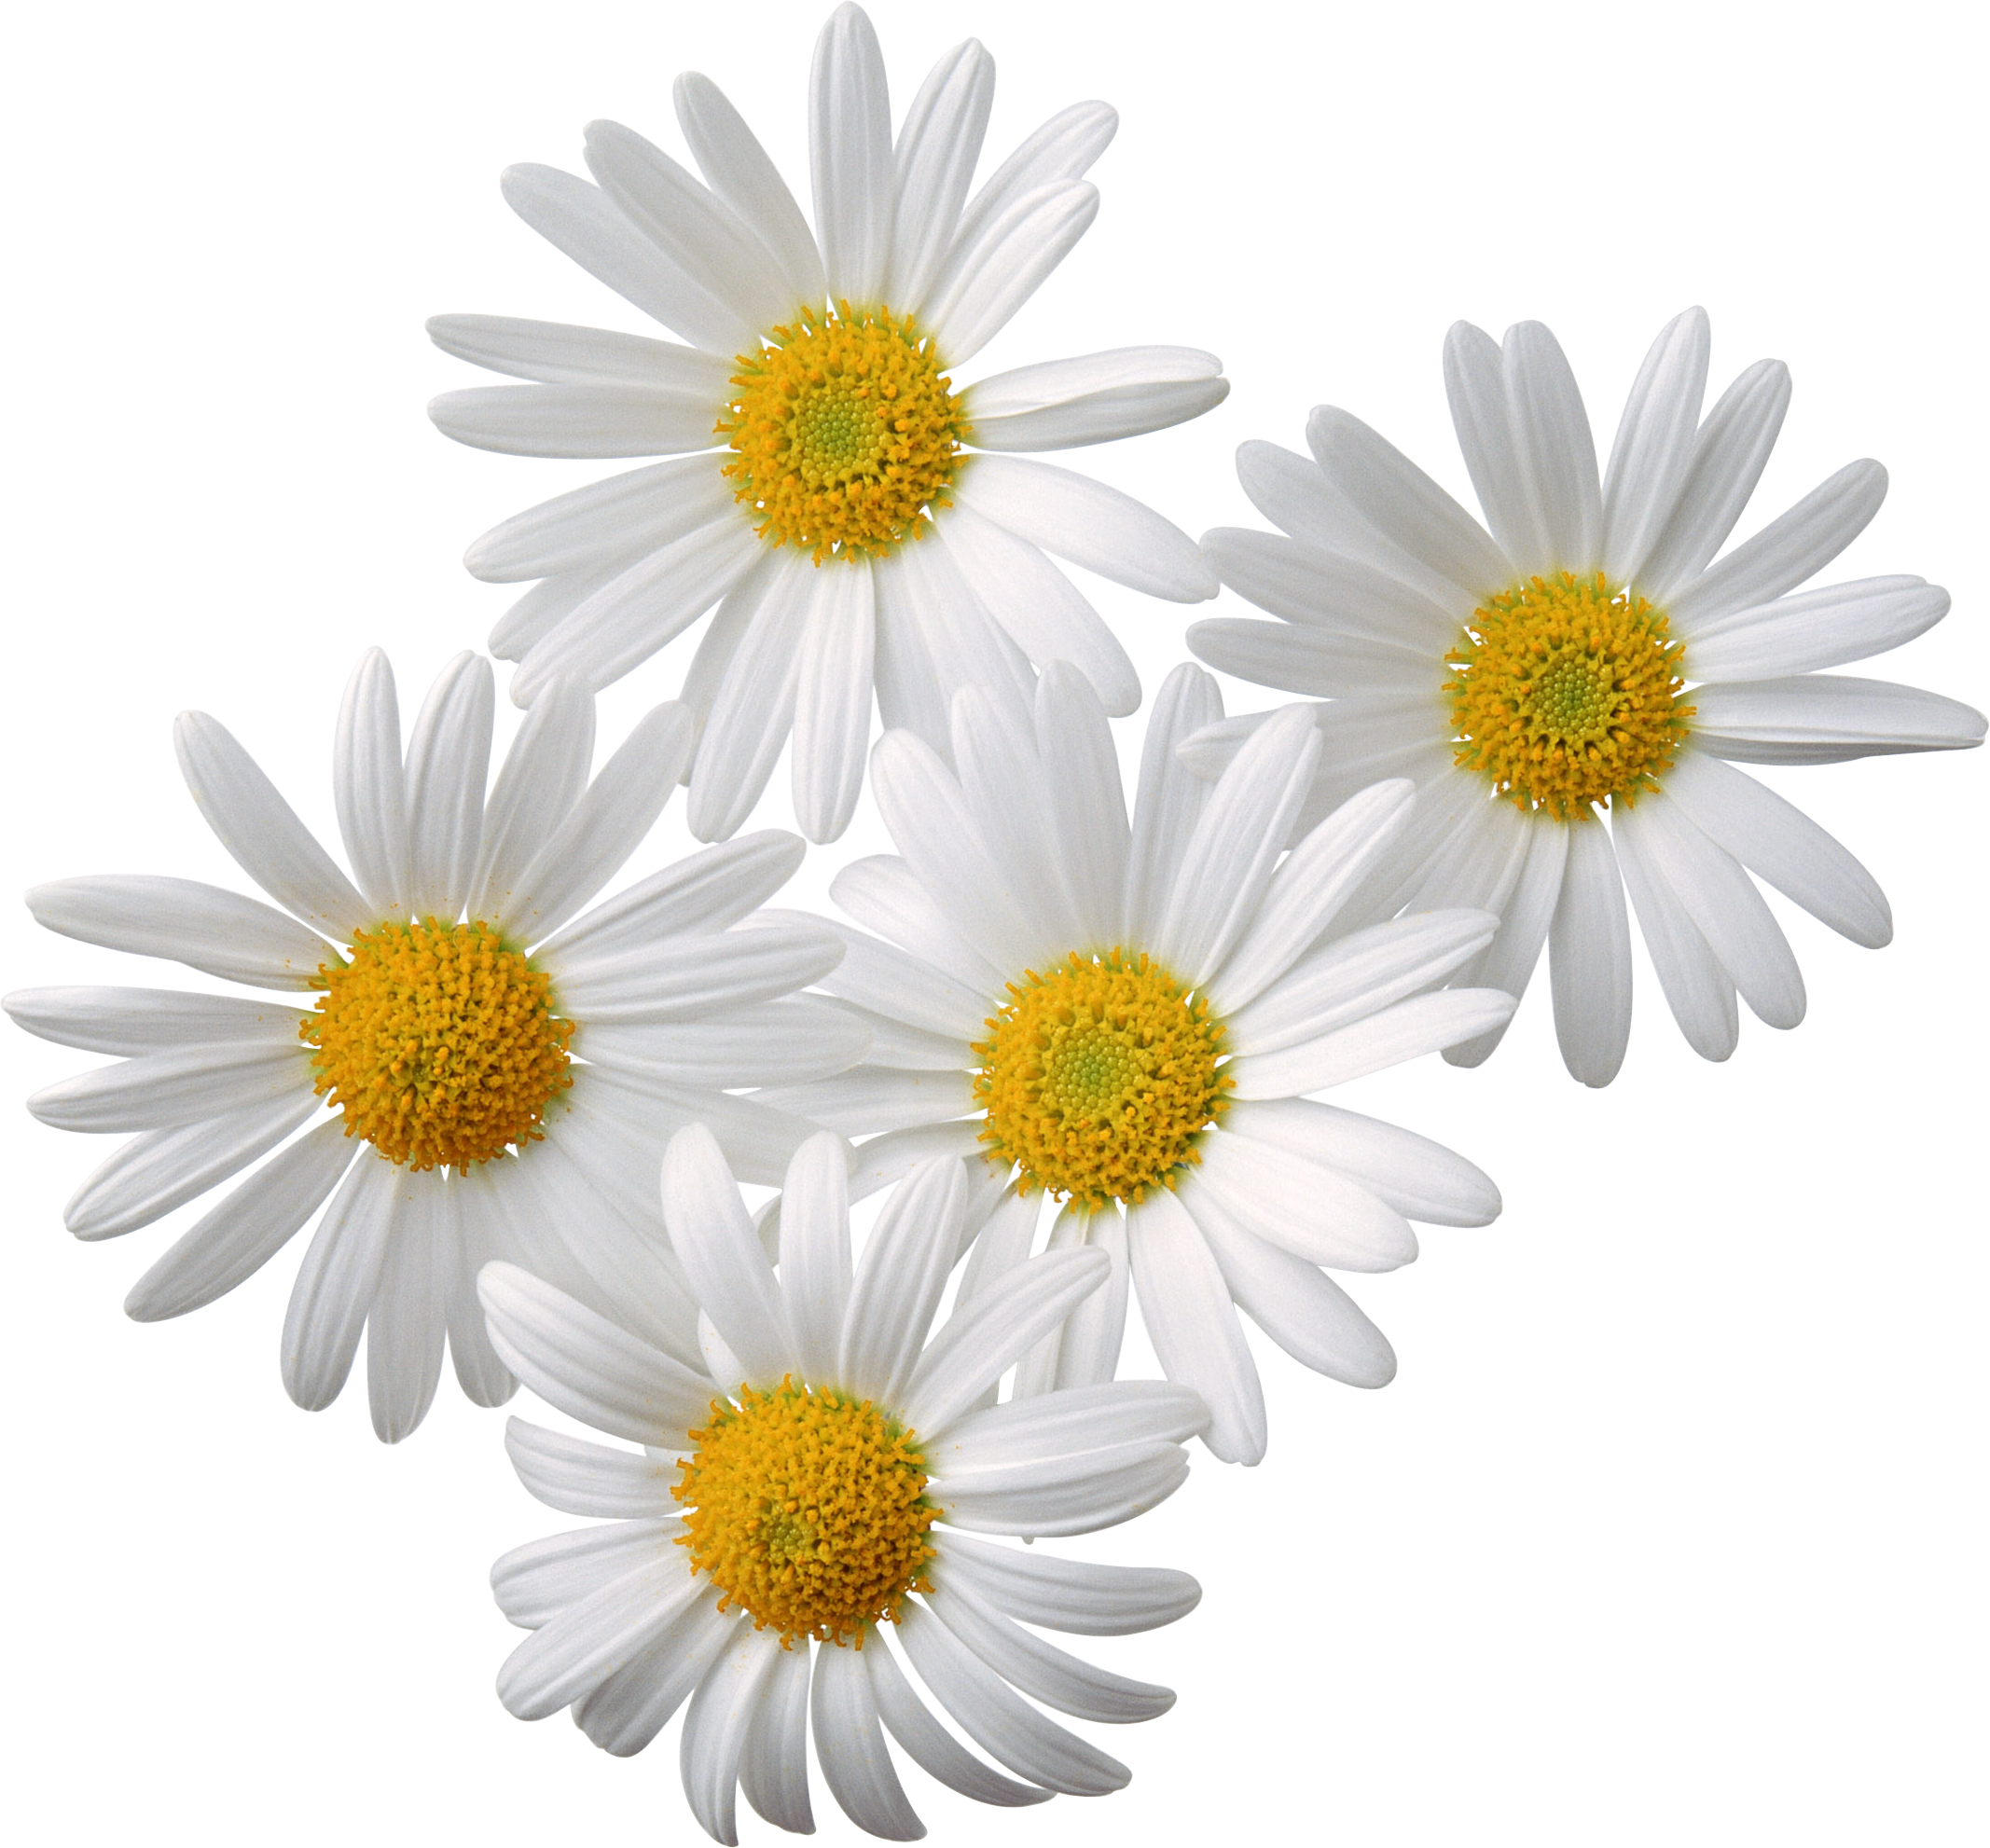 Daisy clipart chamomile flower. White camomile twelve isolated